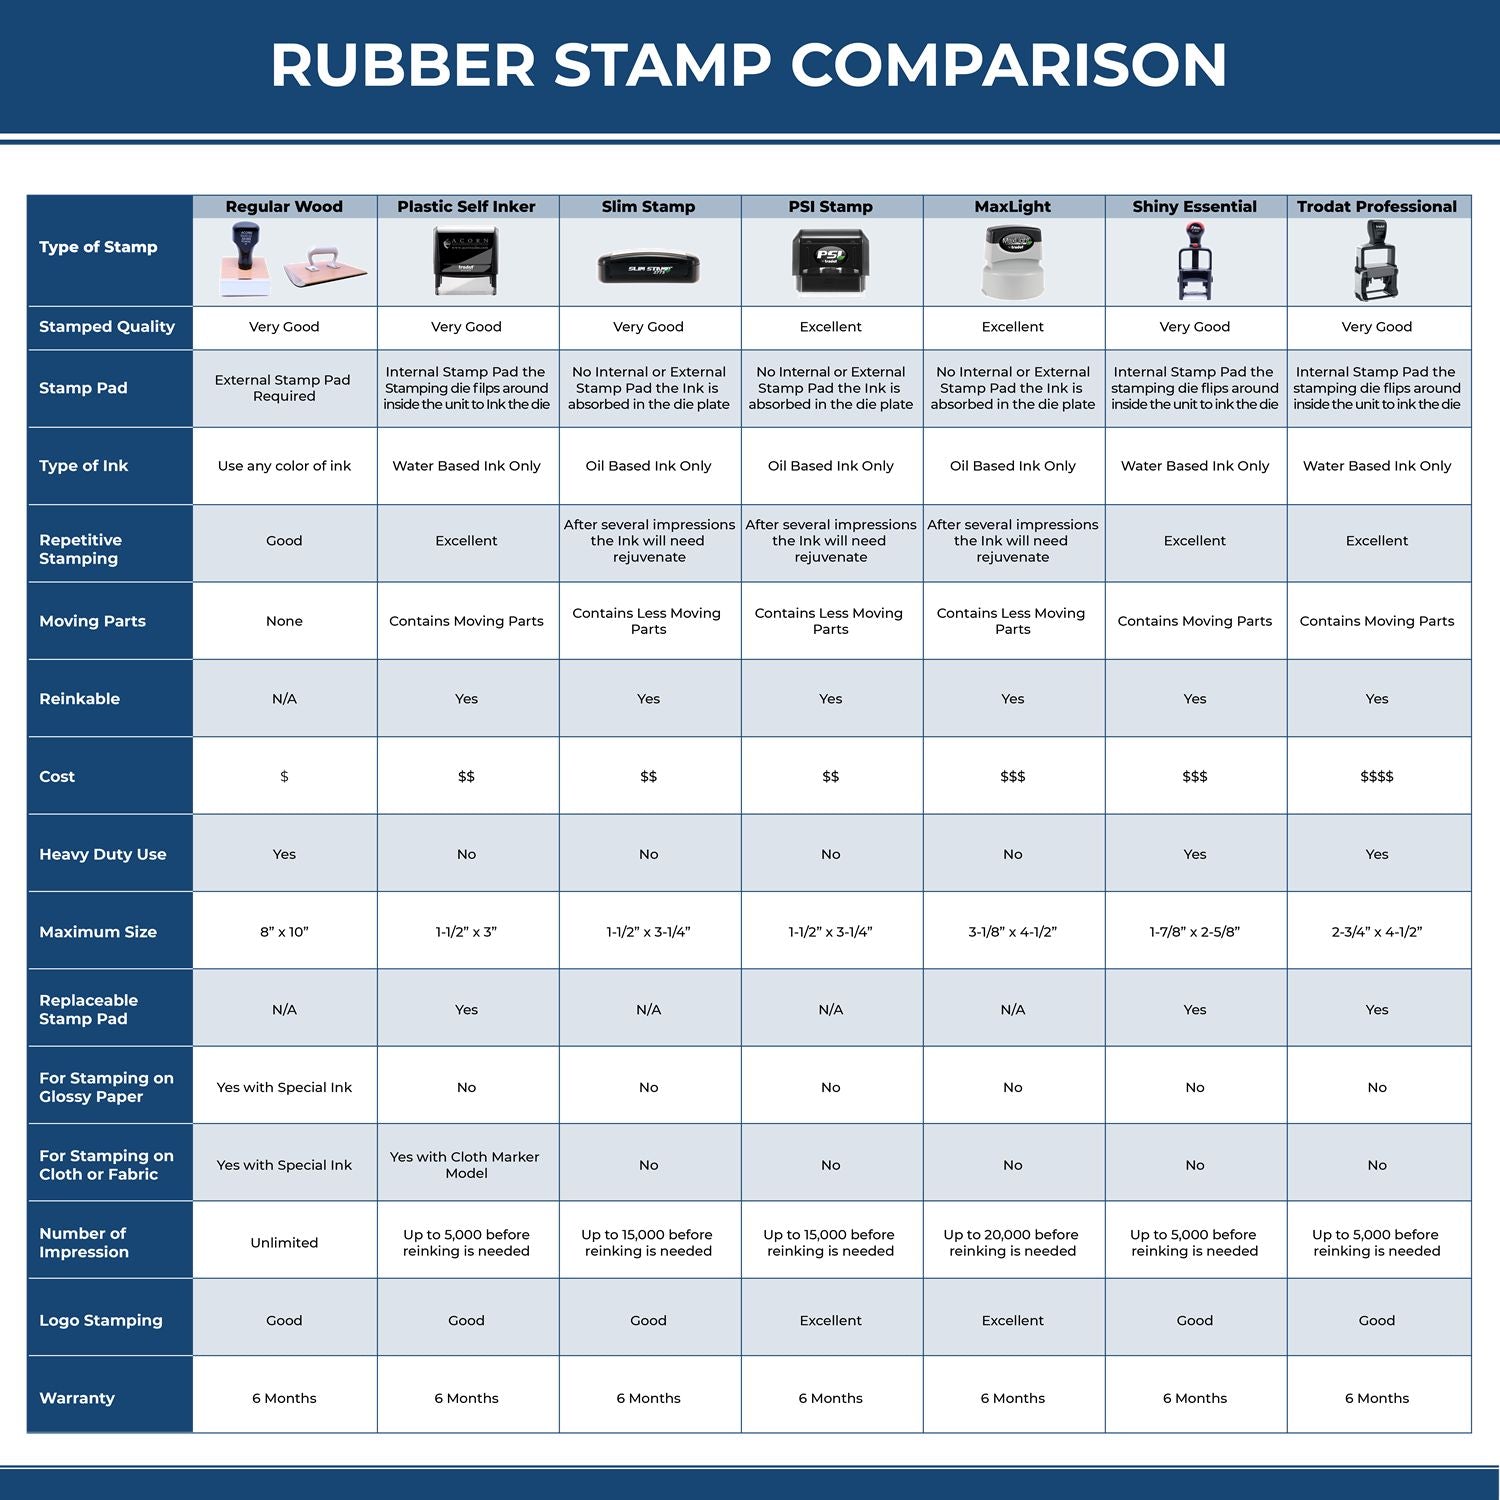 Large Self-Inking Entered with Date Box Stamp 4856S Rubber Stamp Comparison